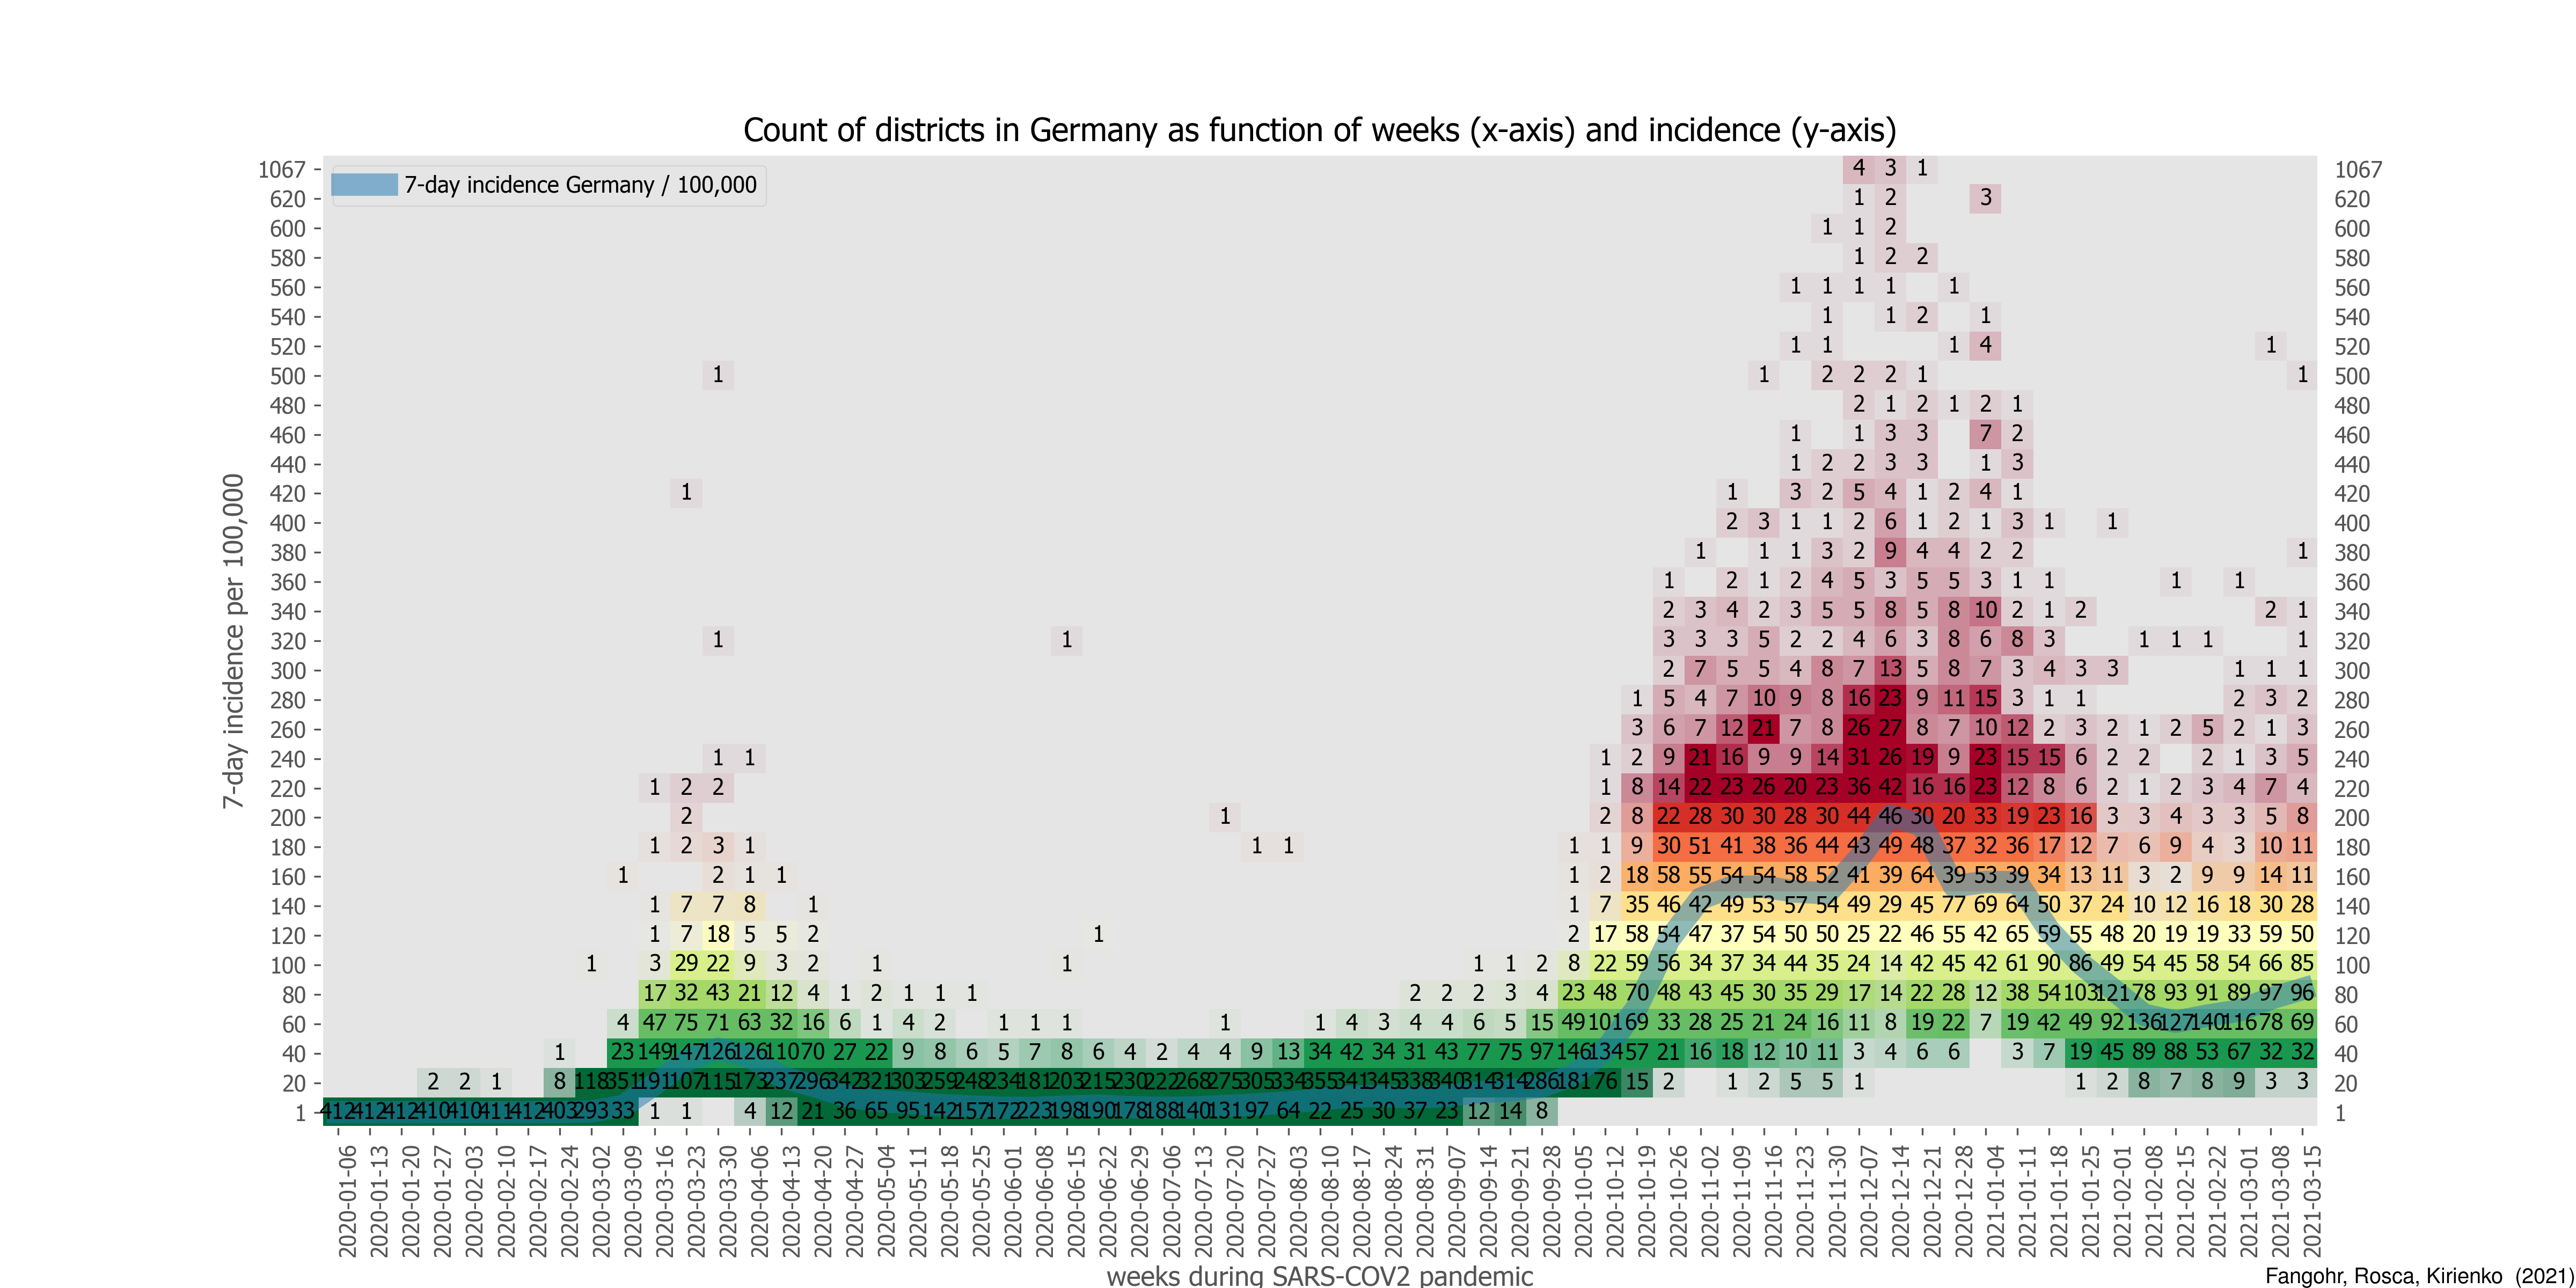 https://www.desy.de/~fangohr/gallery/2021-incidence-count-districts-germany.png